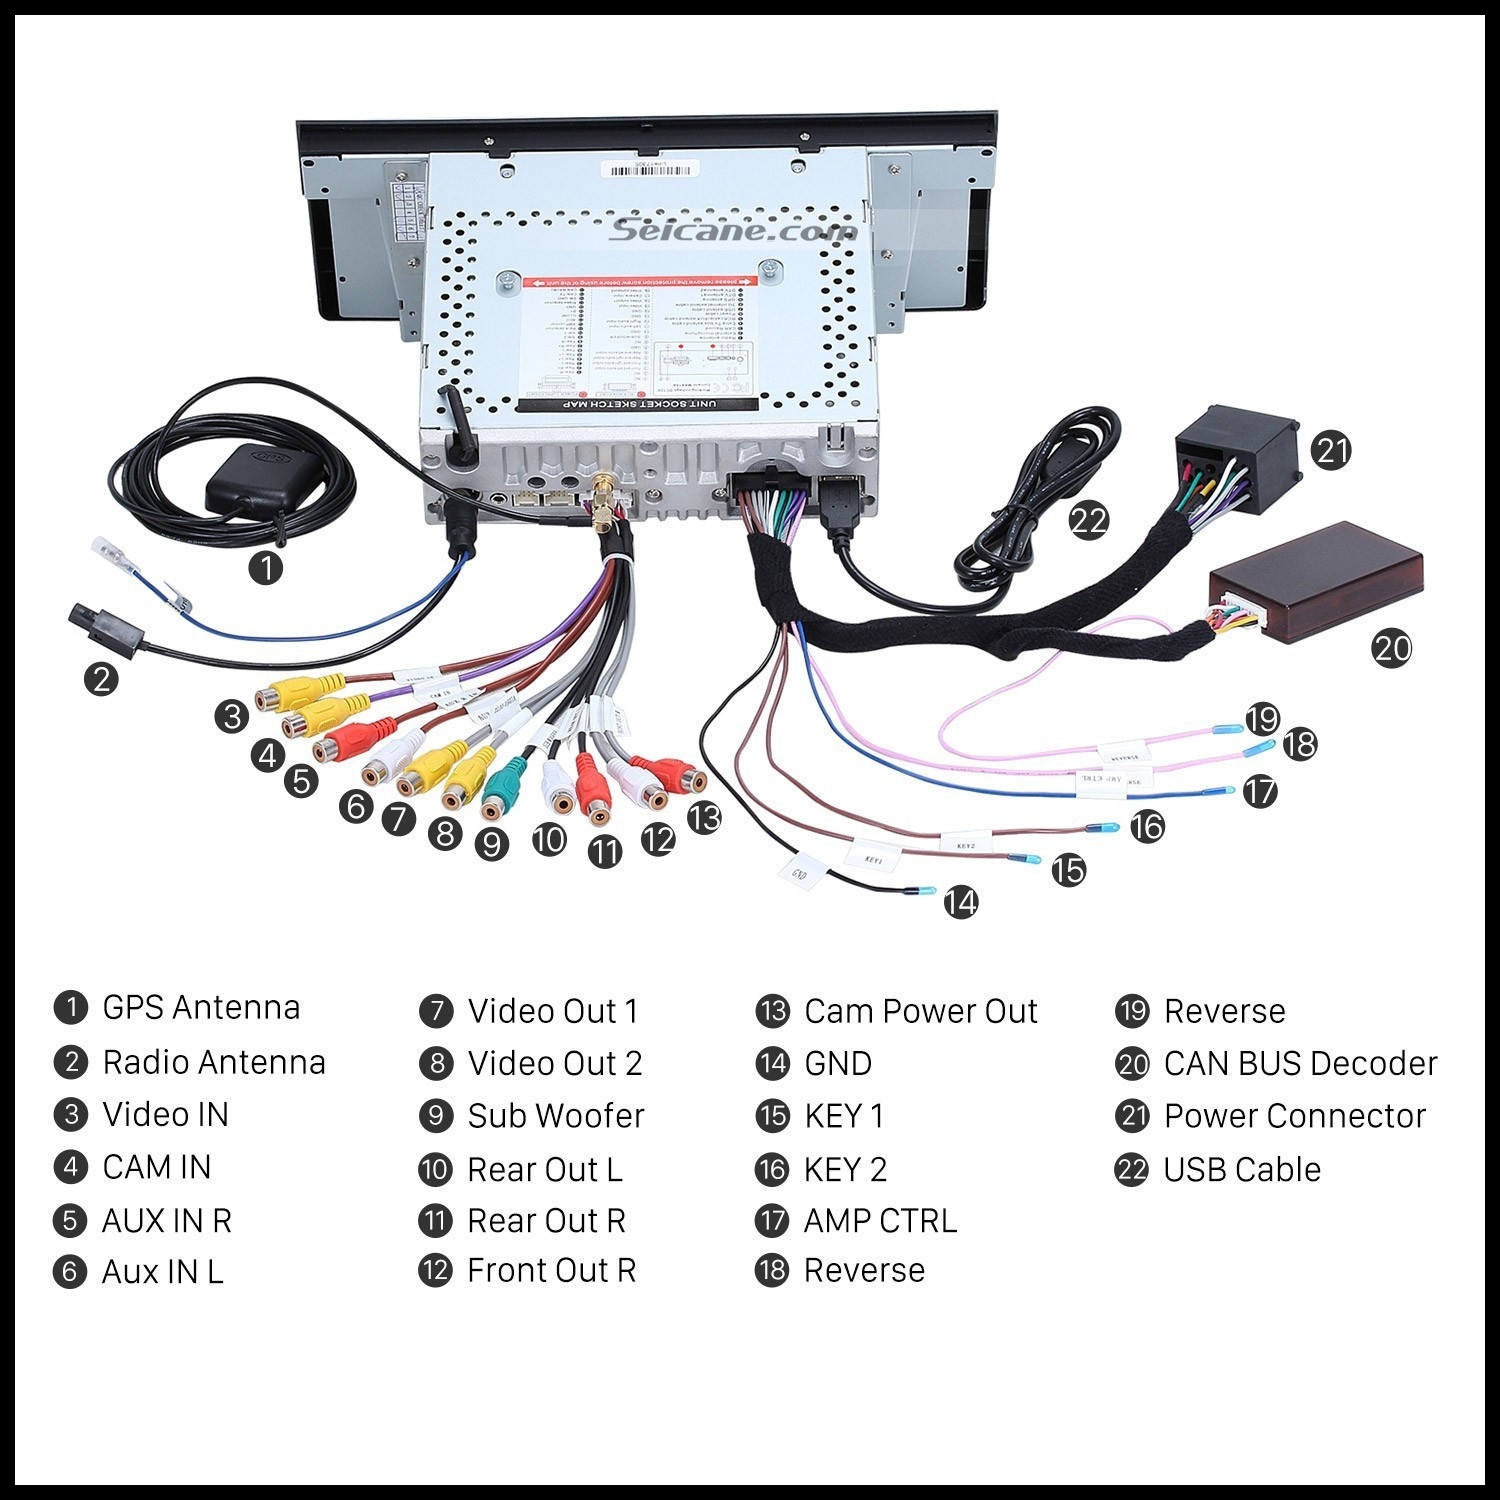 Car Parts Names with Diagram New Reference Wiring Diagram Inverter Joescablecar